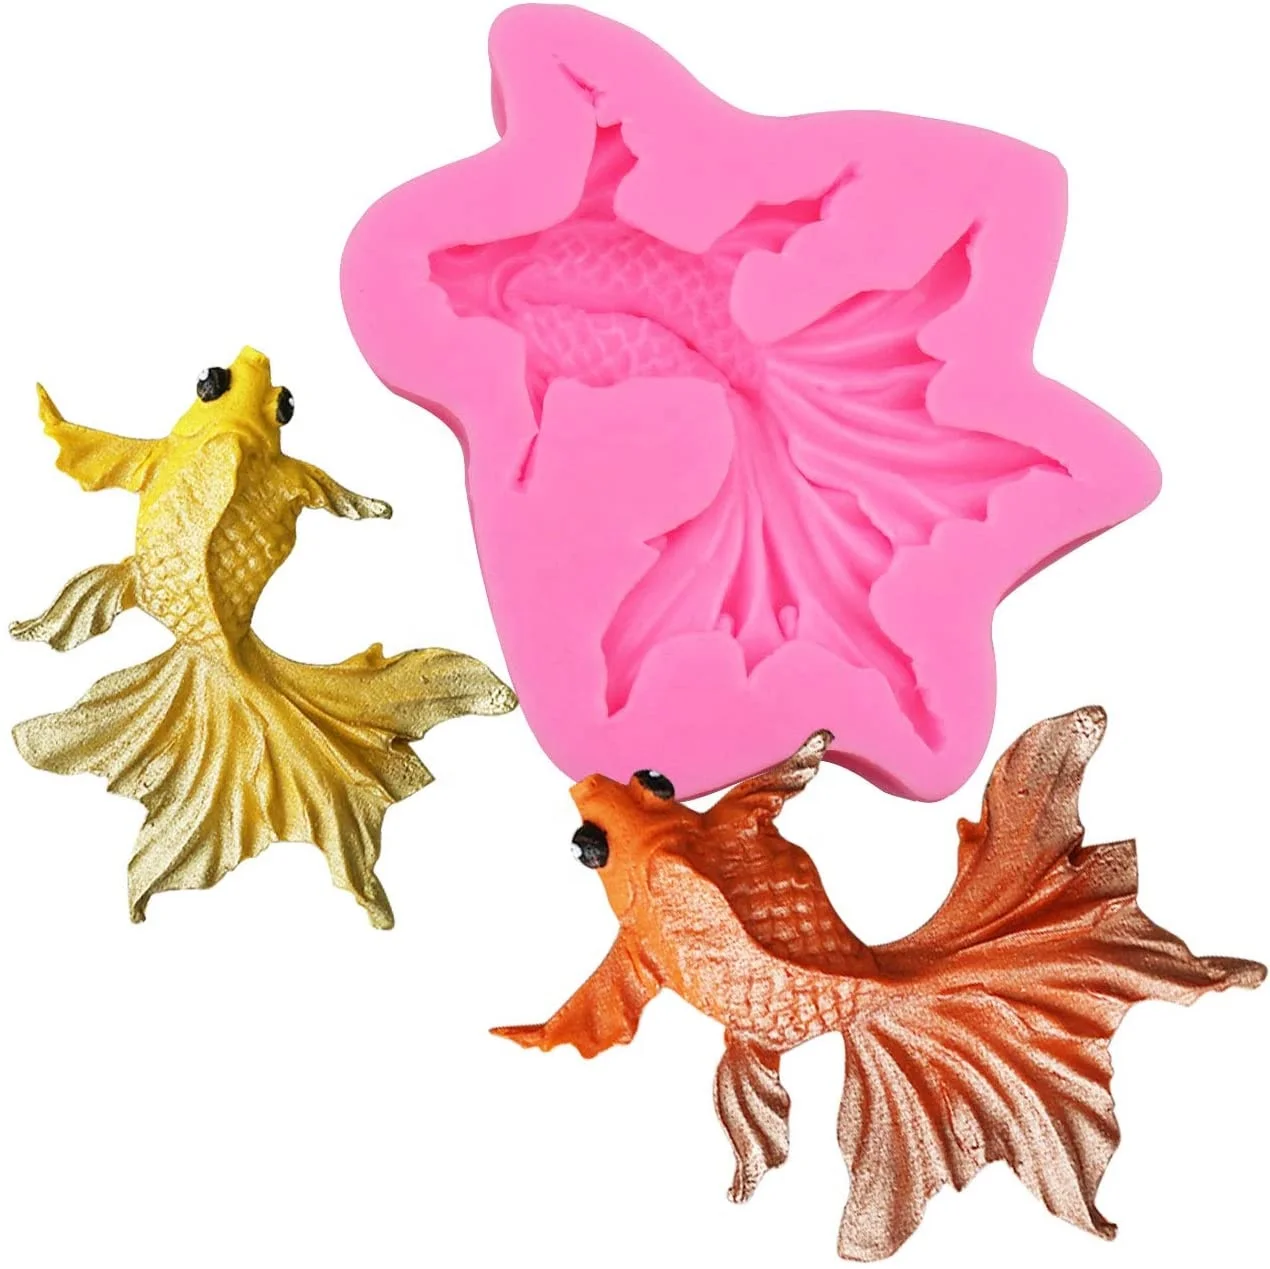 

3D Goldfish Fondant Carp Fish Sugar Craft Silicone Mold for Cake Cupcake Decoration Gum Paste Polymer Clay Soap Candy Boys Girl, Pink